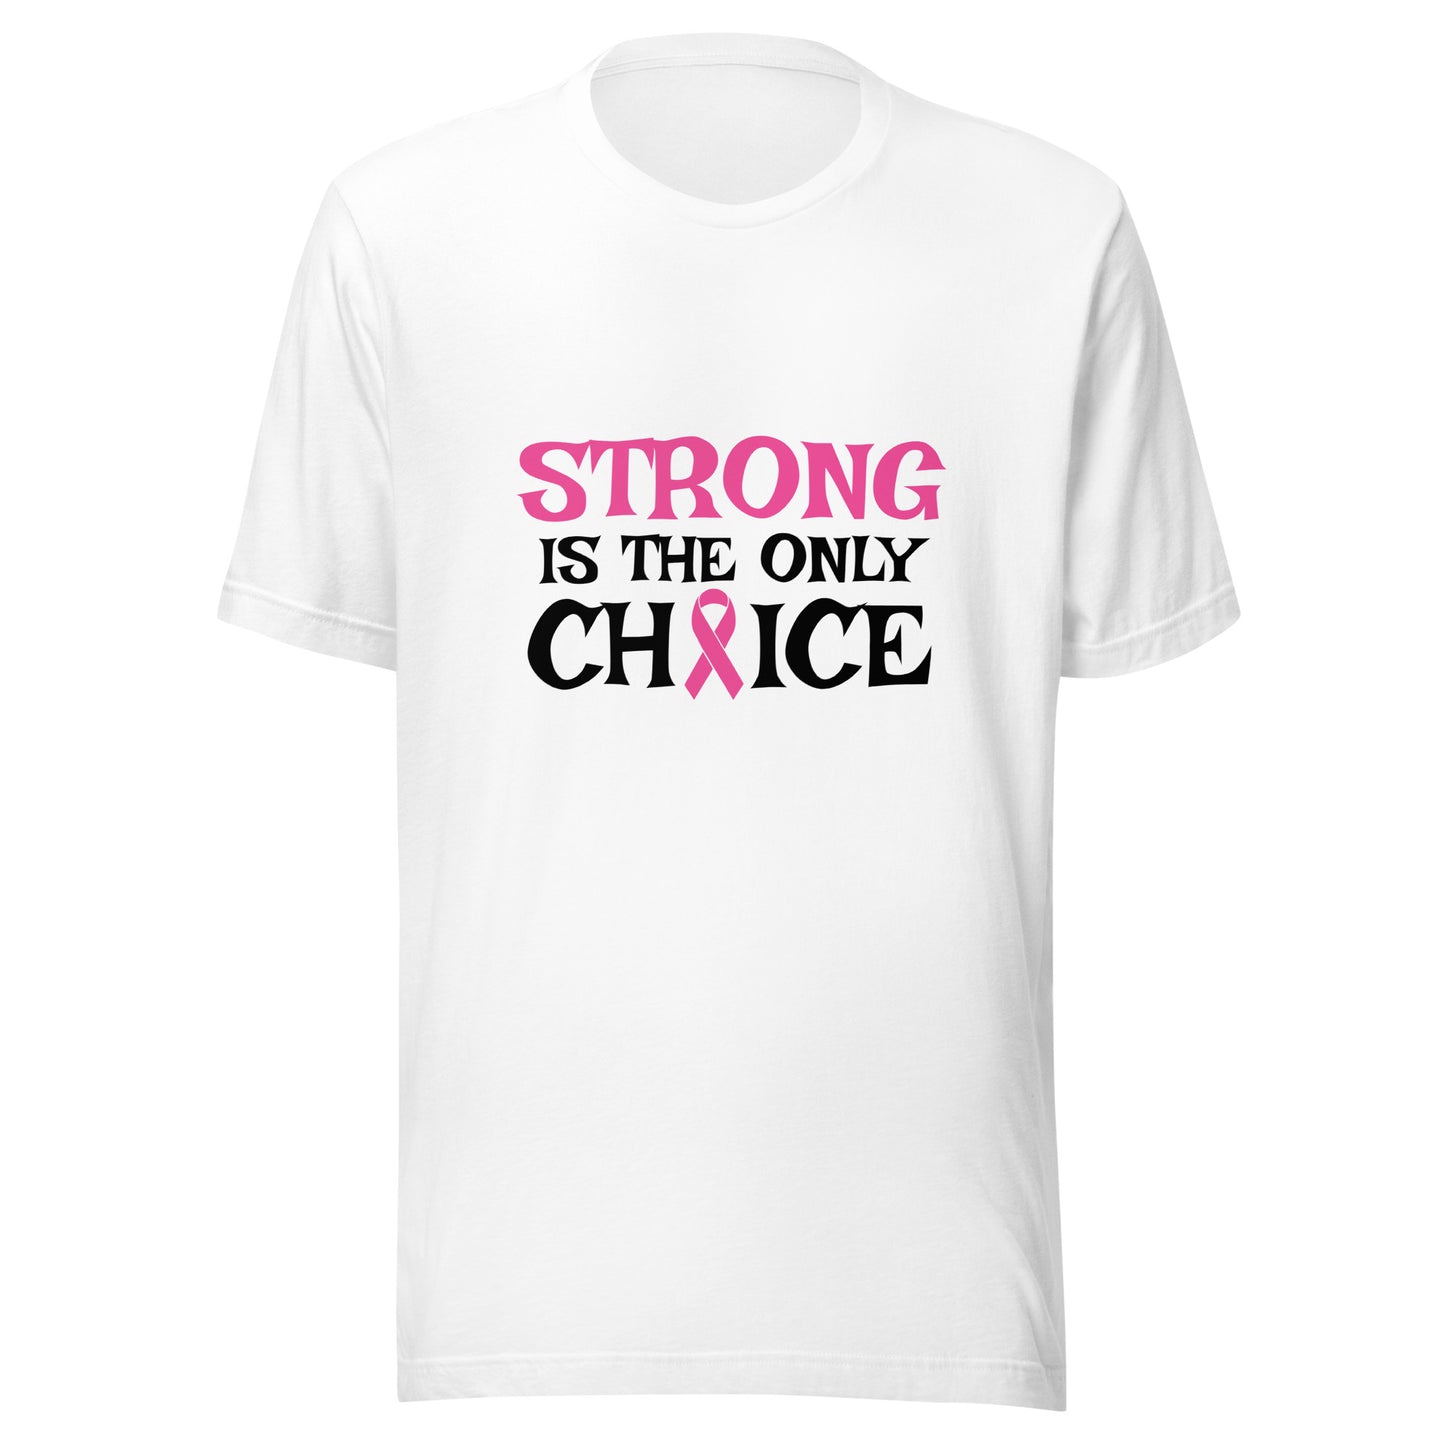 Strong is the only Choice - Breast Cancer Awareness Pink Cancer Ribbon Support Unisex T-shirt